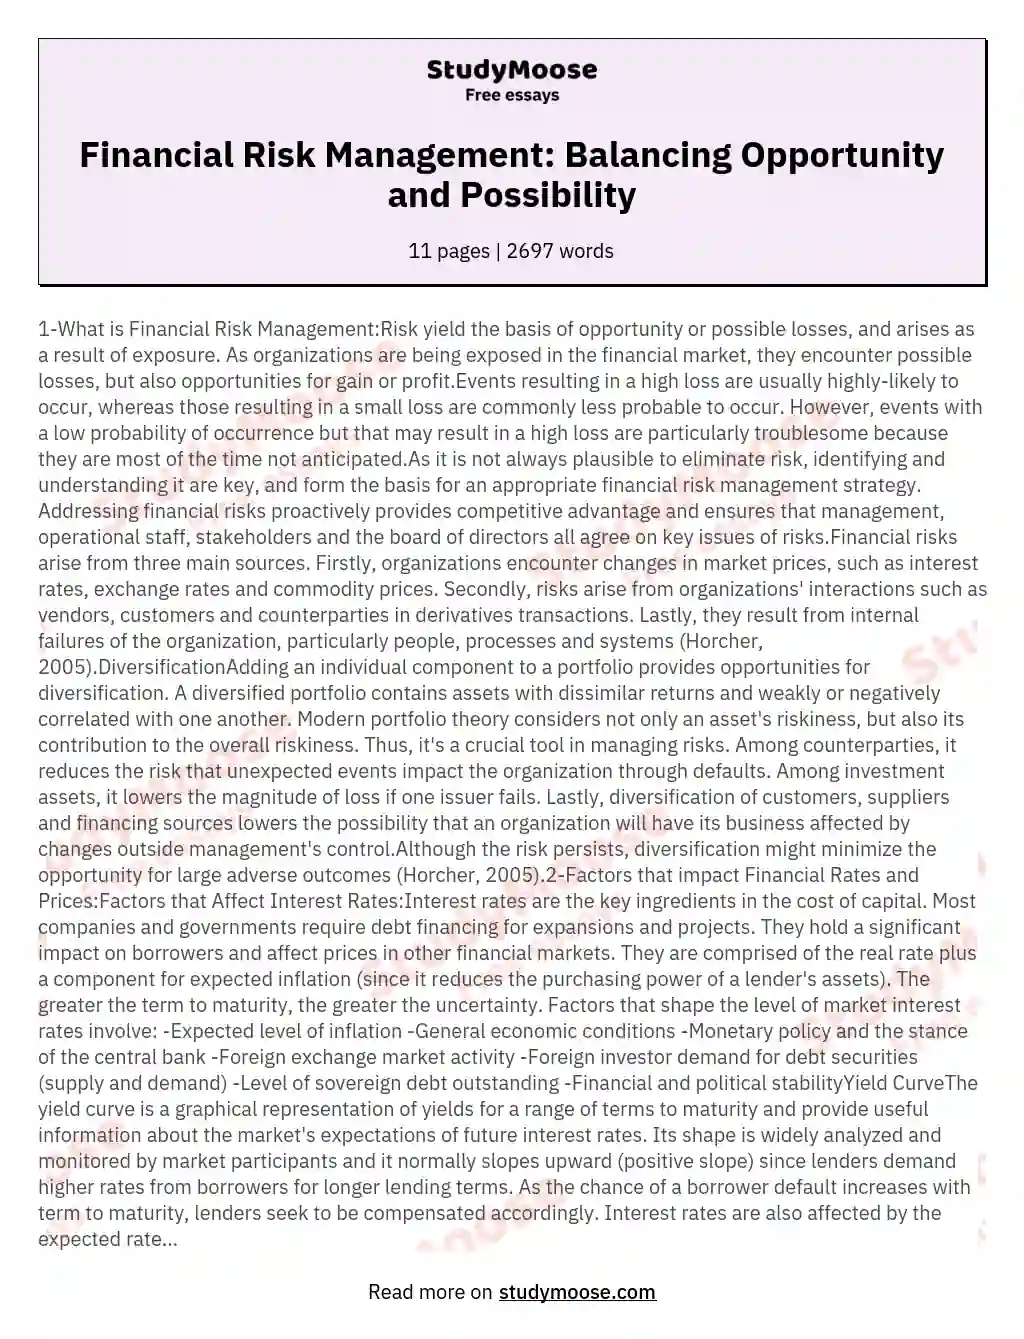 Financial Risk Management: Balancing Opportunity and Possibility essay